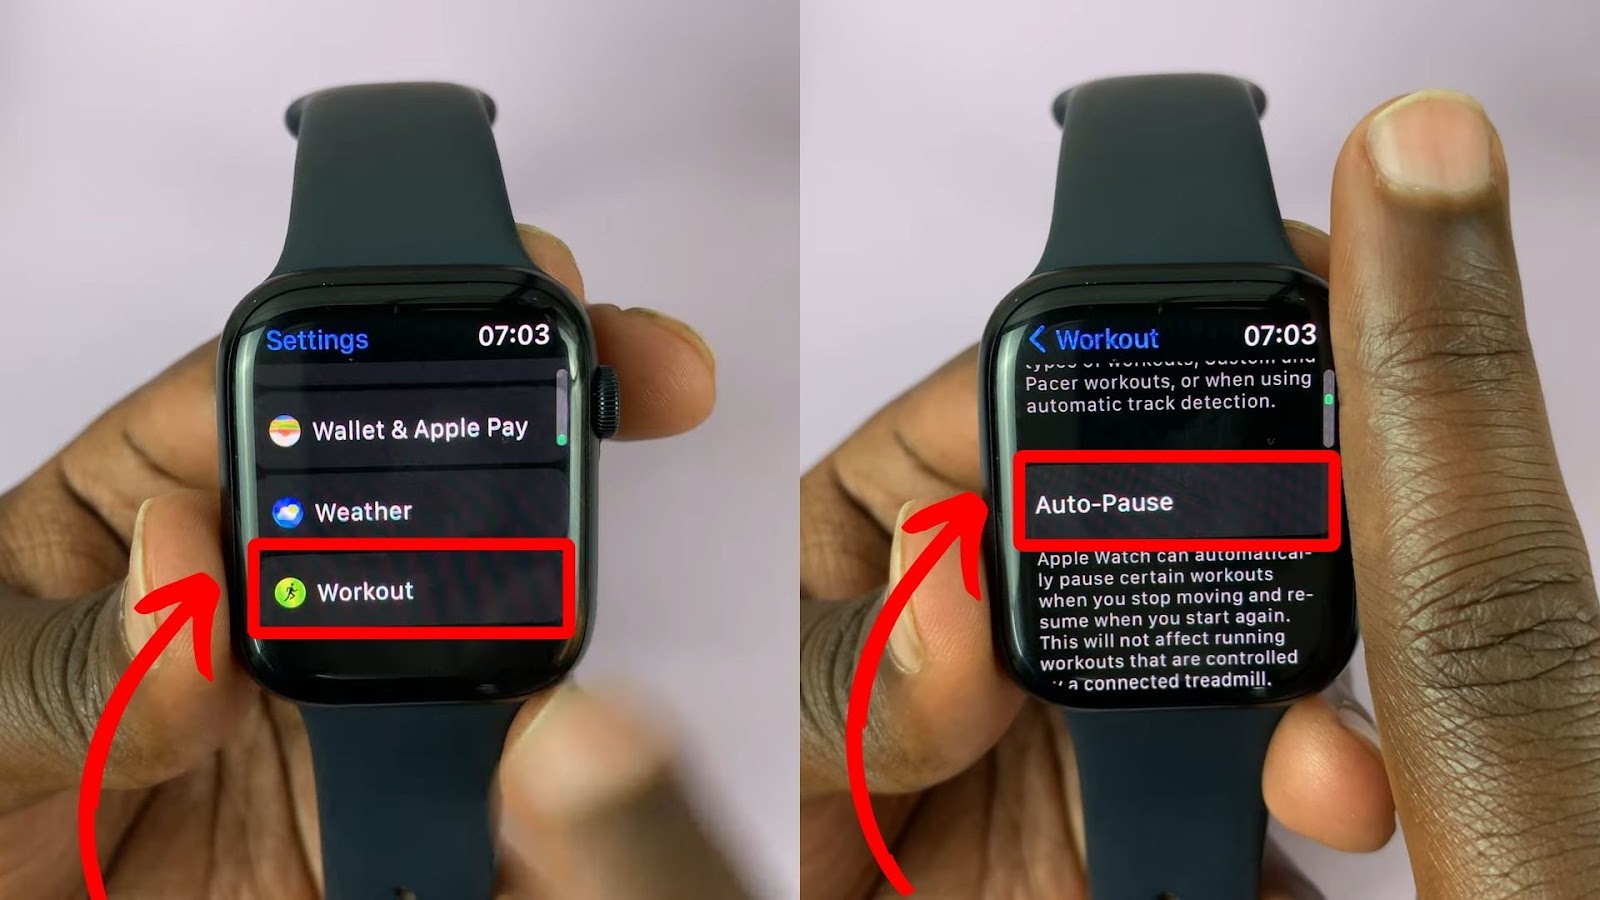 How To Enable Apple Watch Workout Auto-Pause Feature